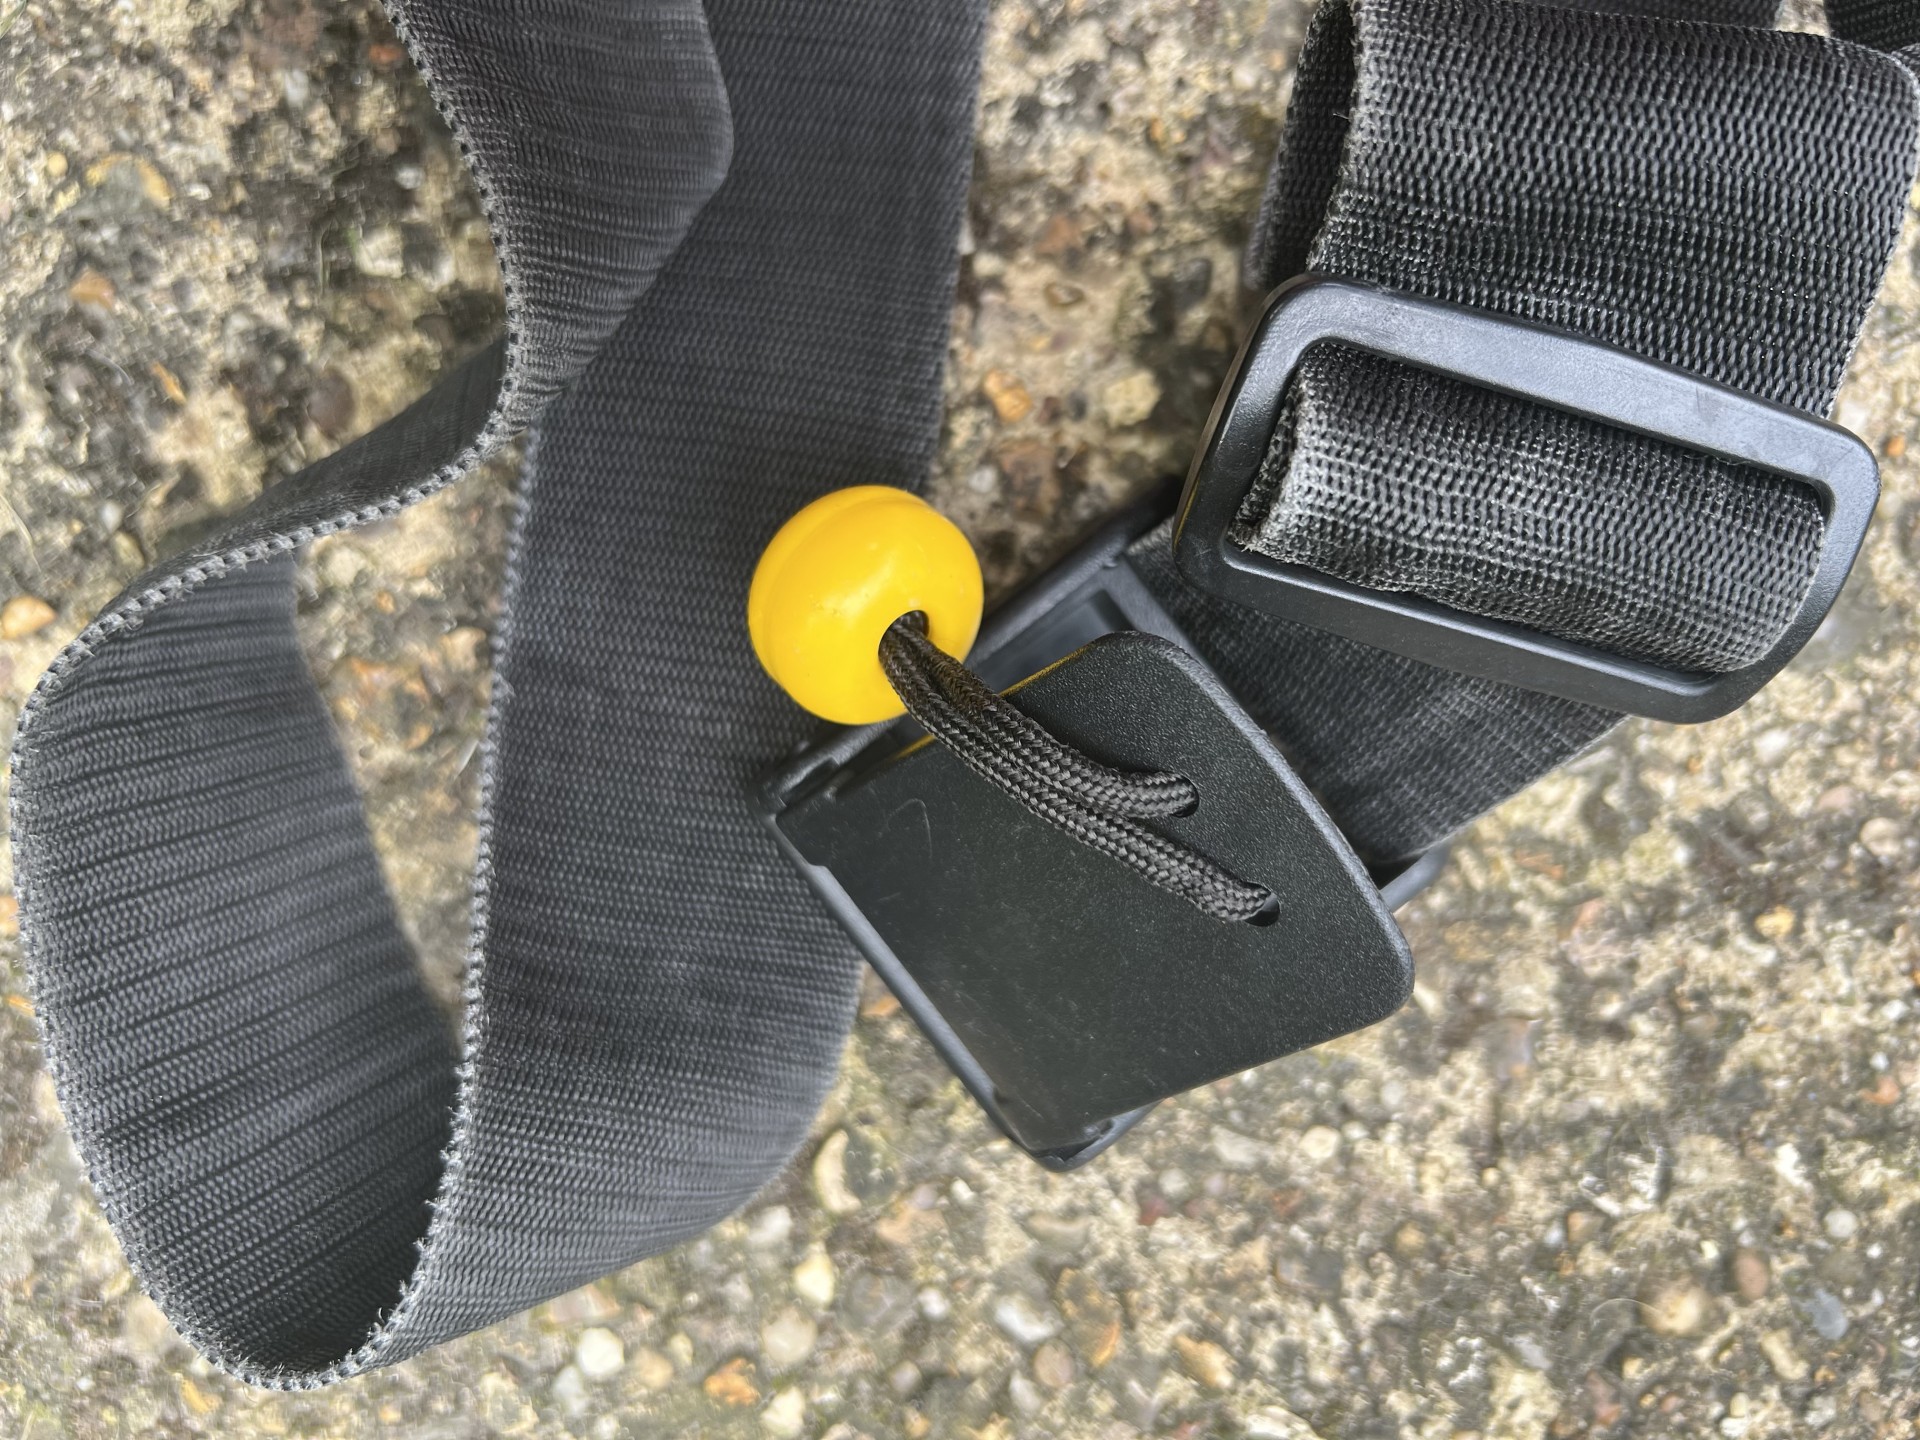 Quick release buckle with a yellow toggle sold at NOMAD Sea Kayaking.